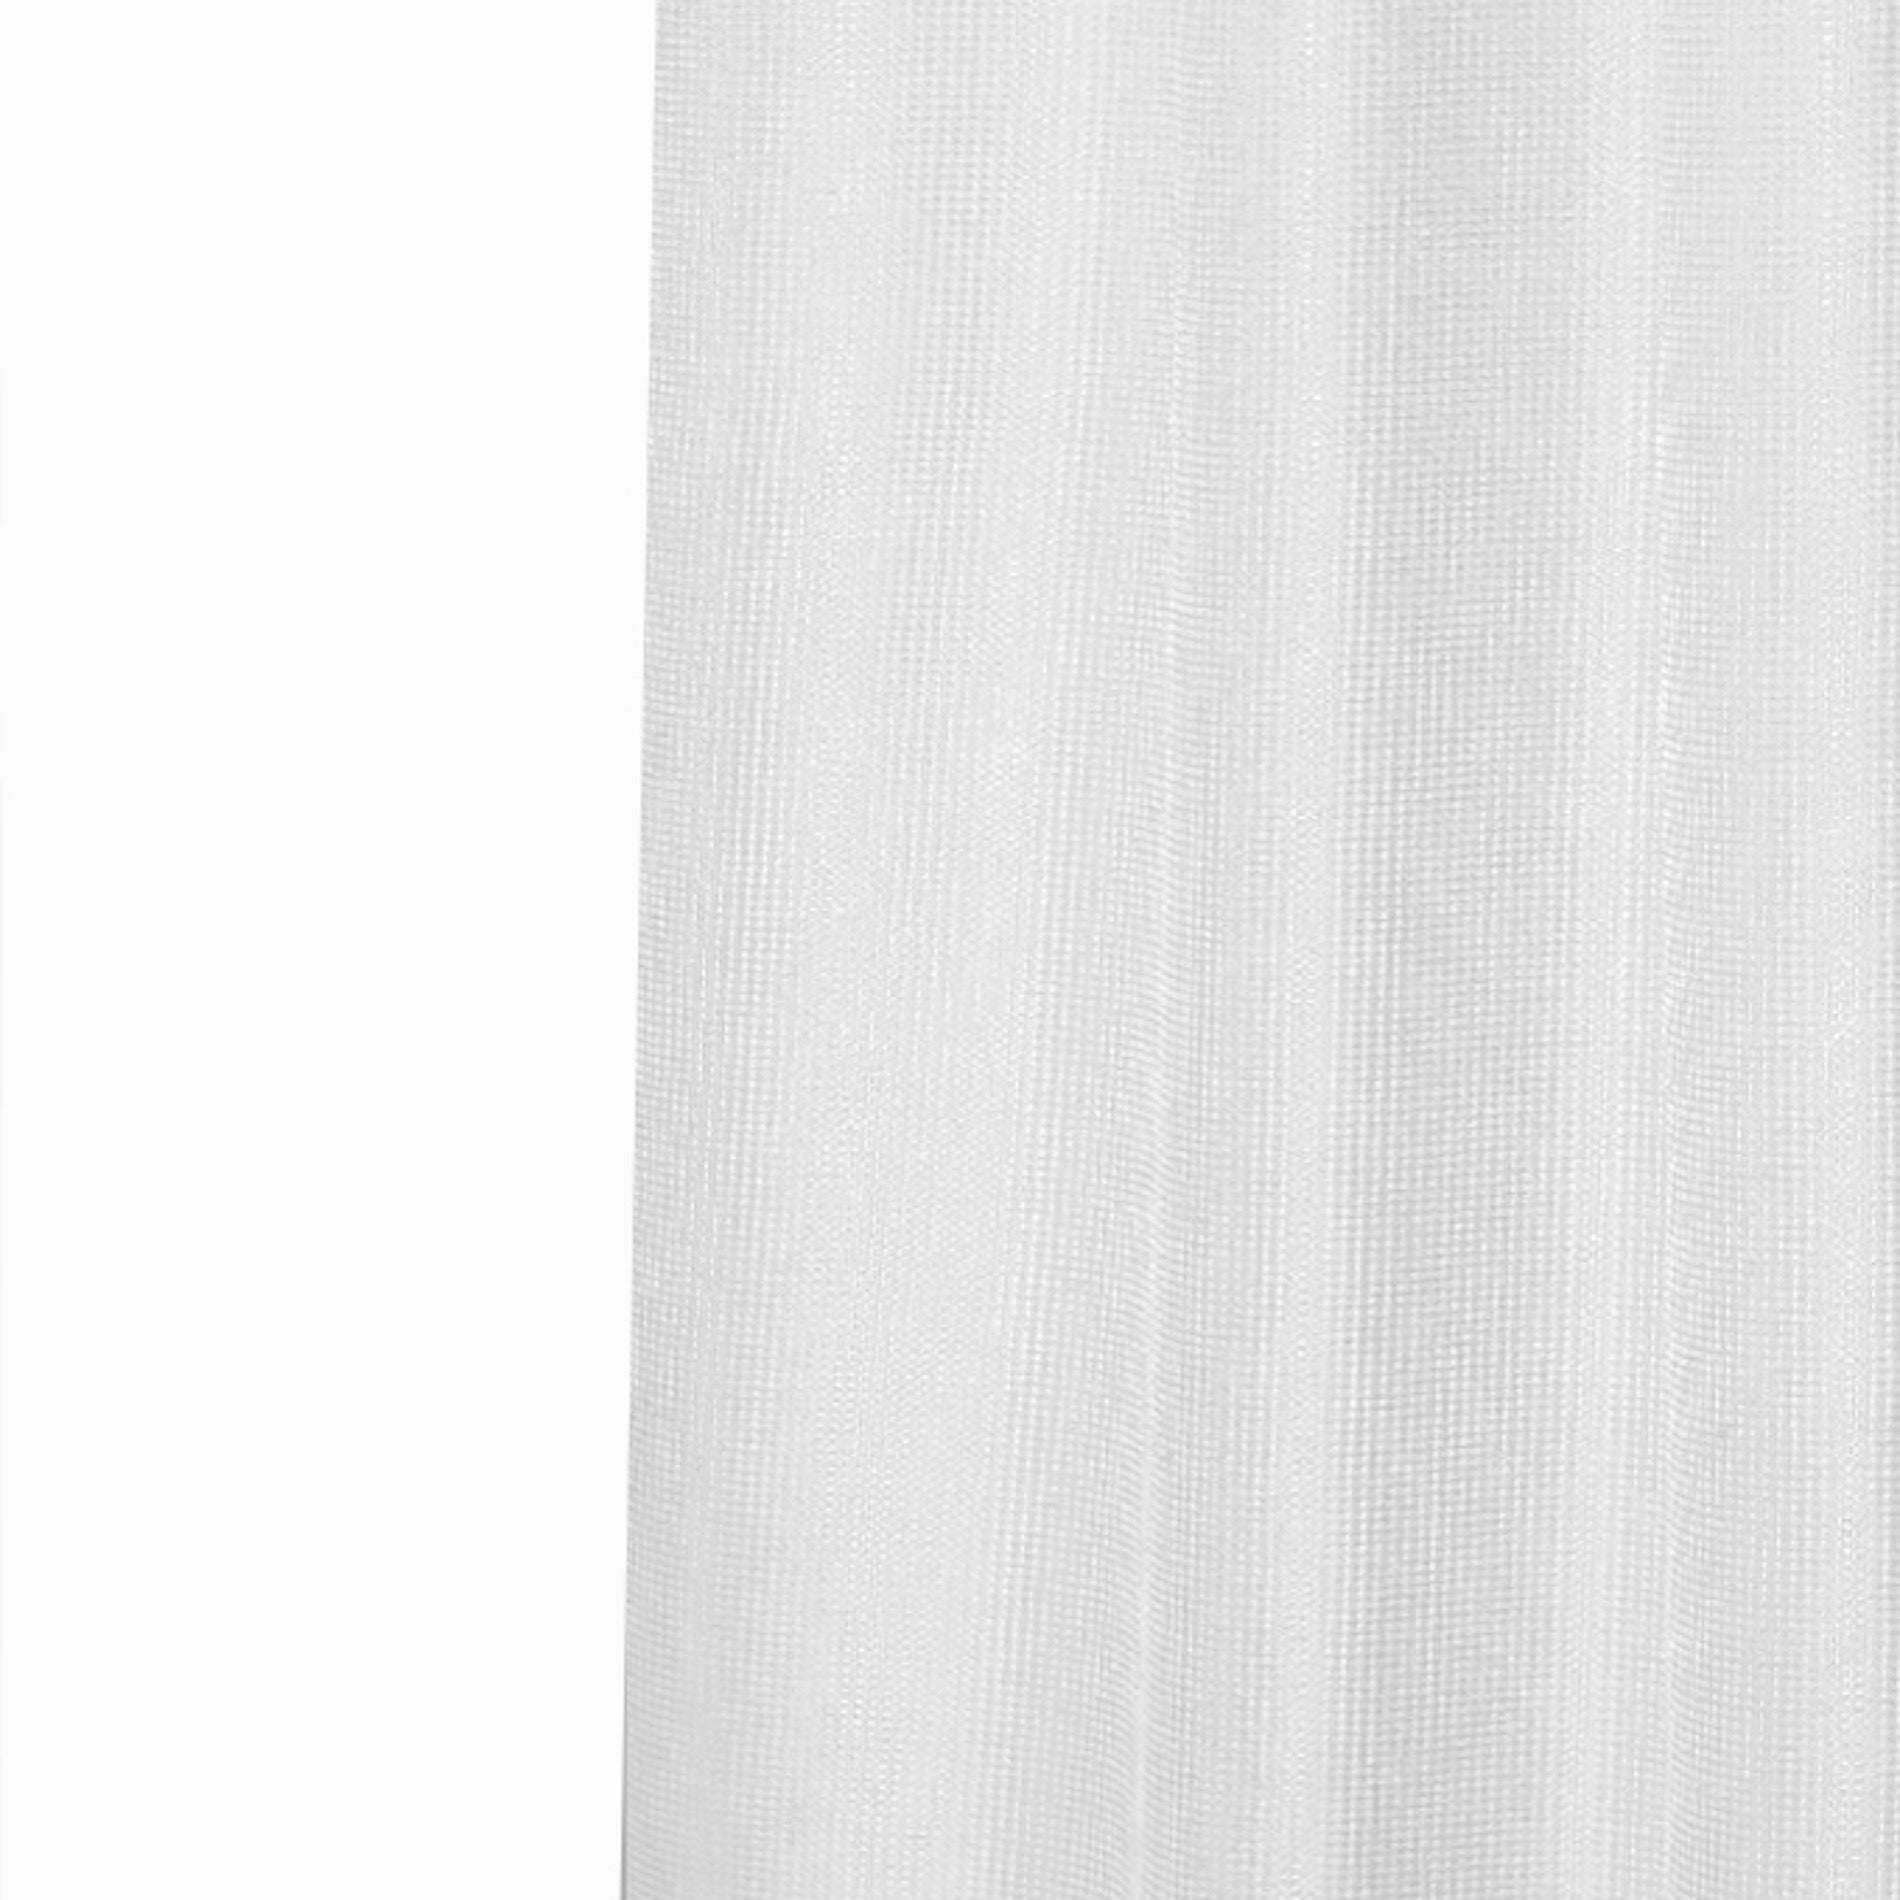 Dainty Home Hotel Collection Waffle Heavy Duty Fabric Waffle Weave Hotel Quality Shower Curtain